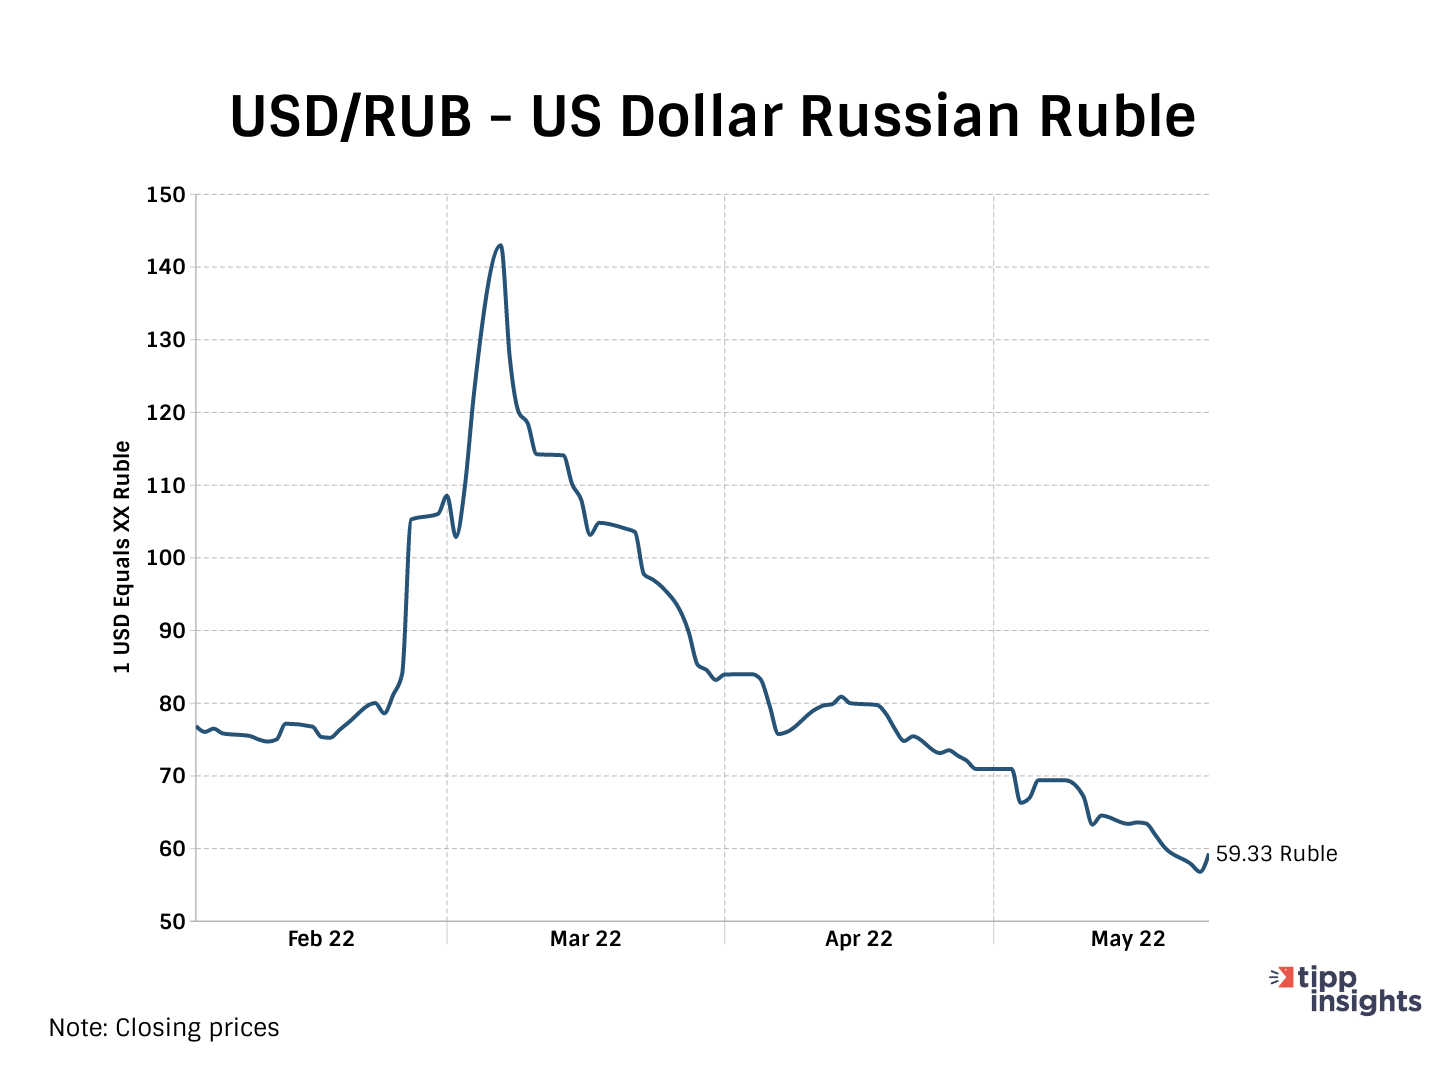 Closing prices of the U.S. Dollar vs. Russian Ruble February 2022 - May 2022